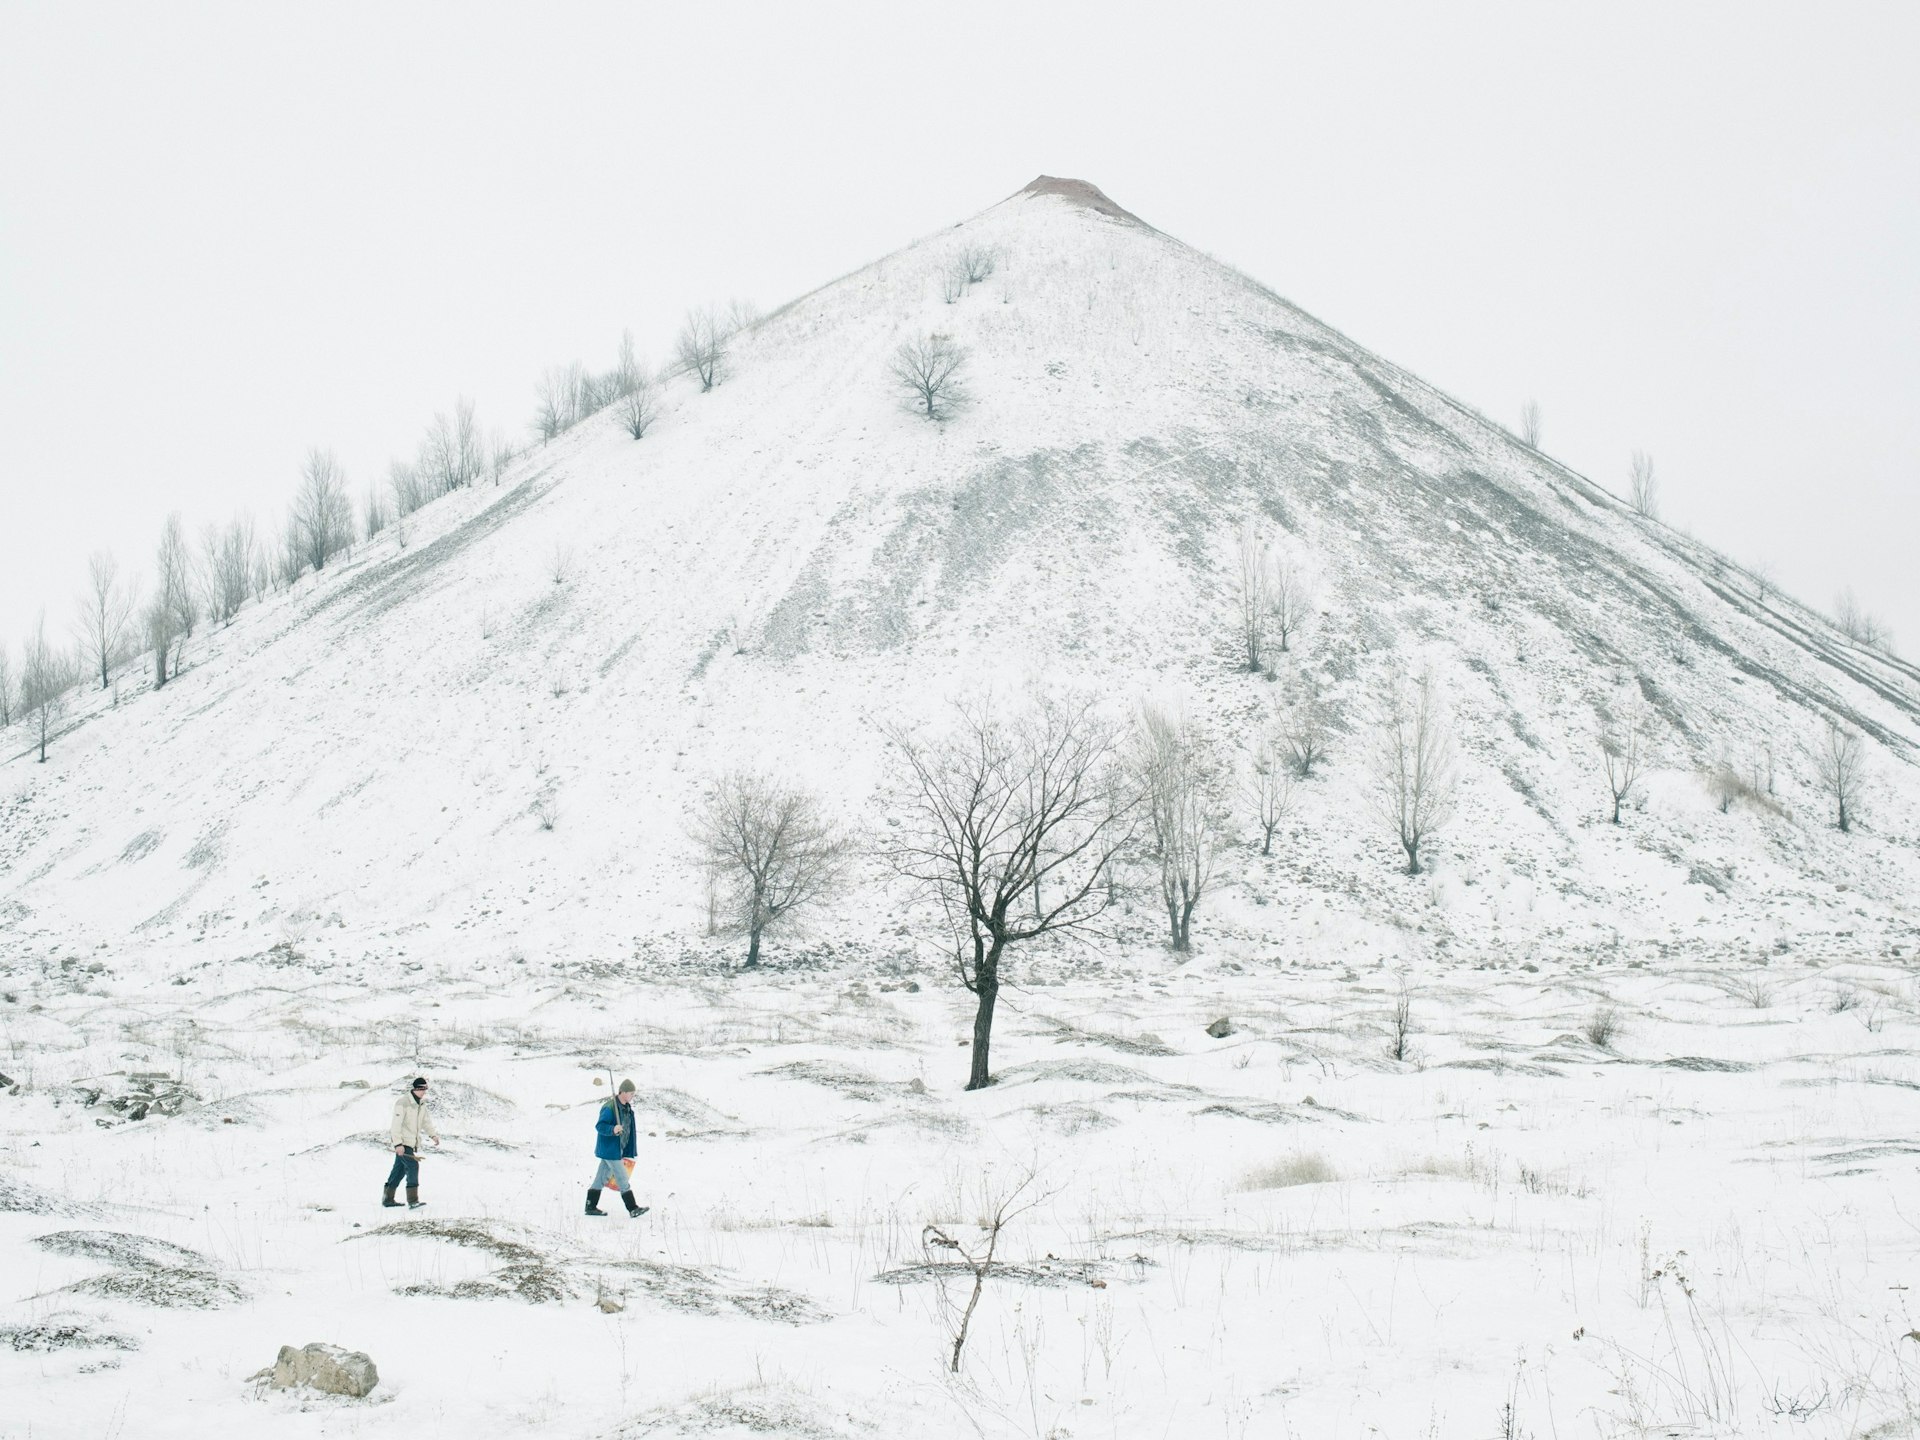 One of the many slag heaps that are dotted around Dzerzhynsk, January 2016